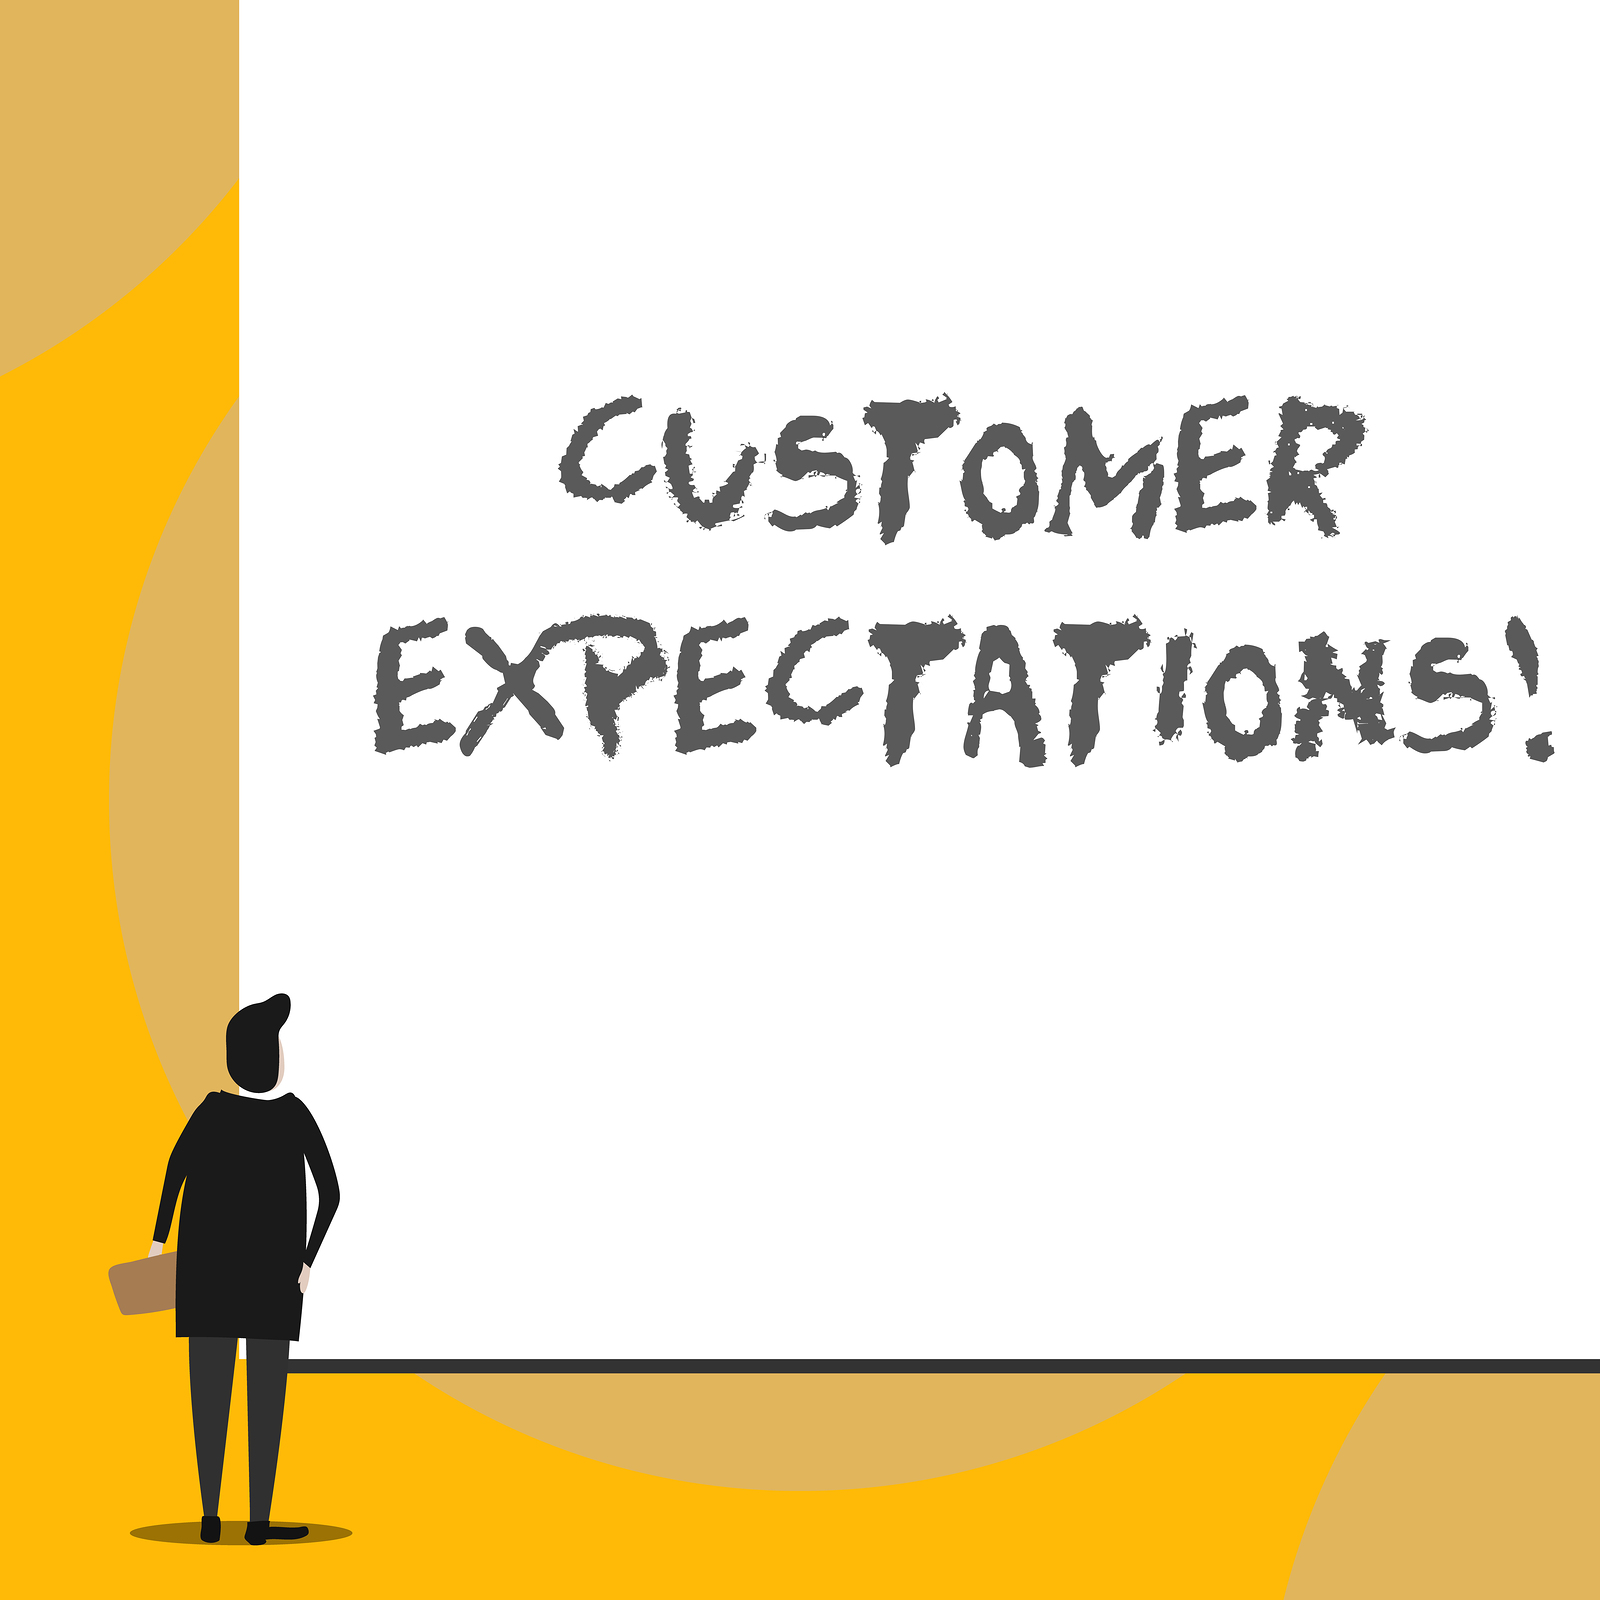 A Great Customer Service Message and Example on How to Exceed Customers’ Expectations